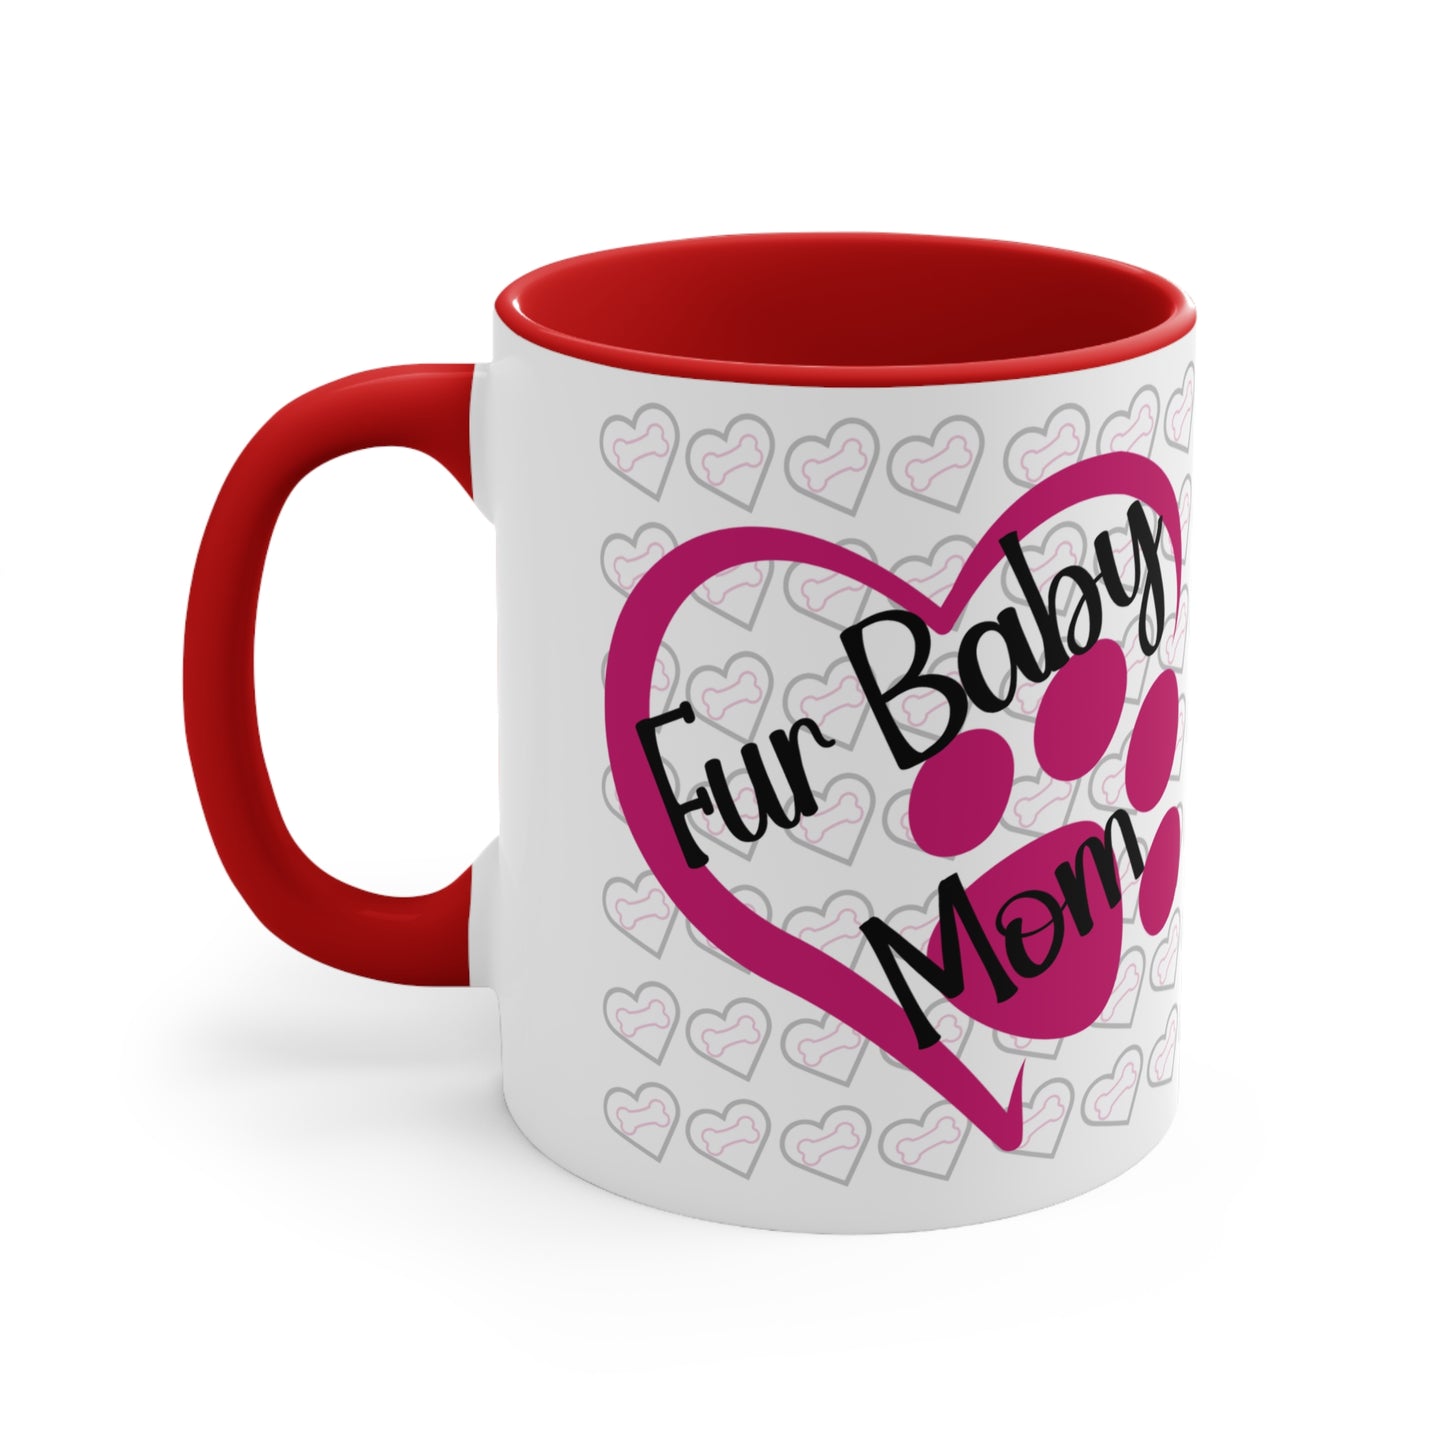 Fur baby mom coffee mug with pink heart and paw print 11 oz, back view in red.